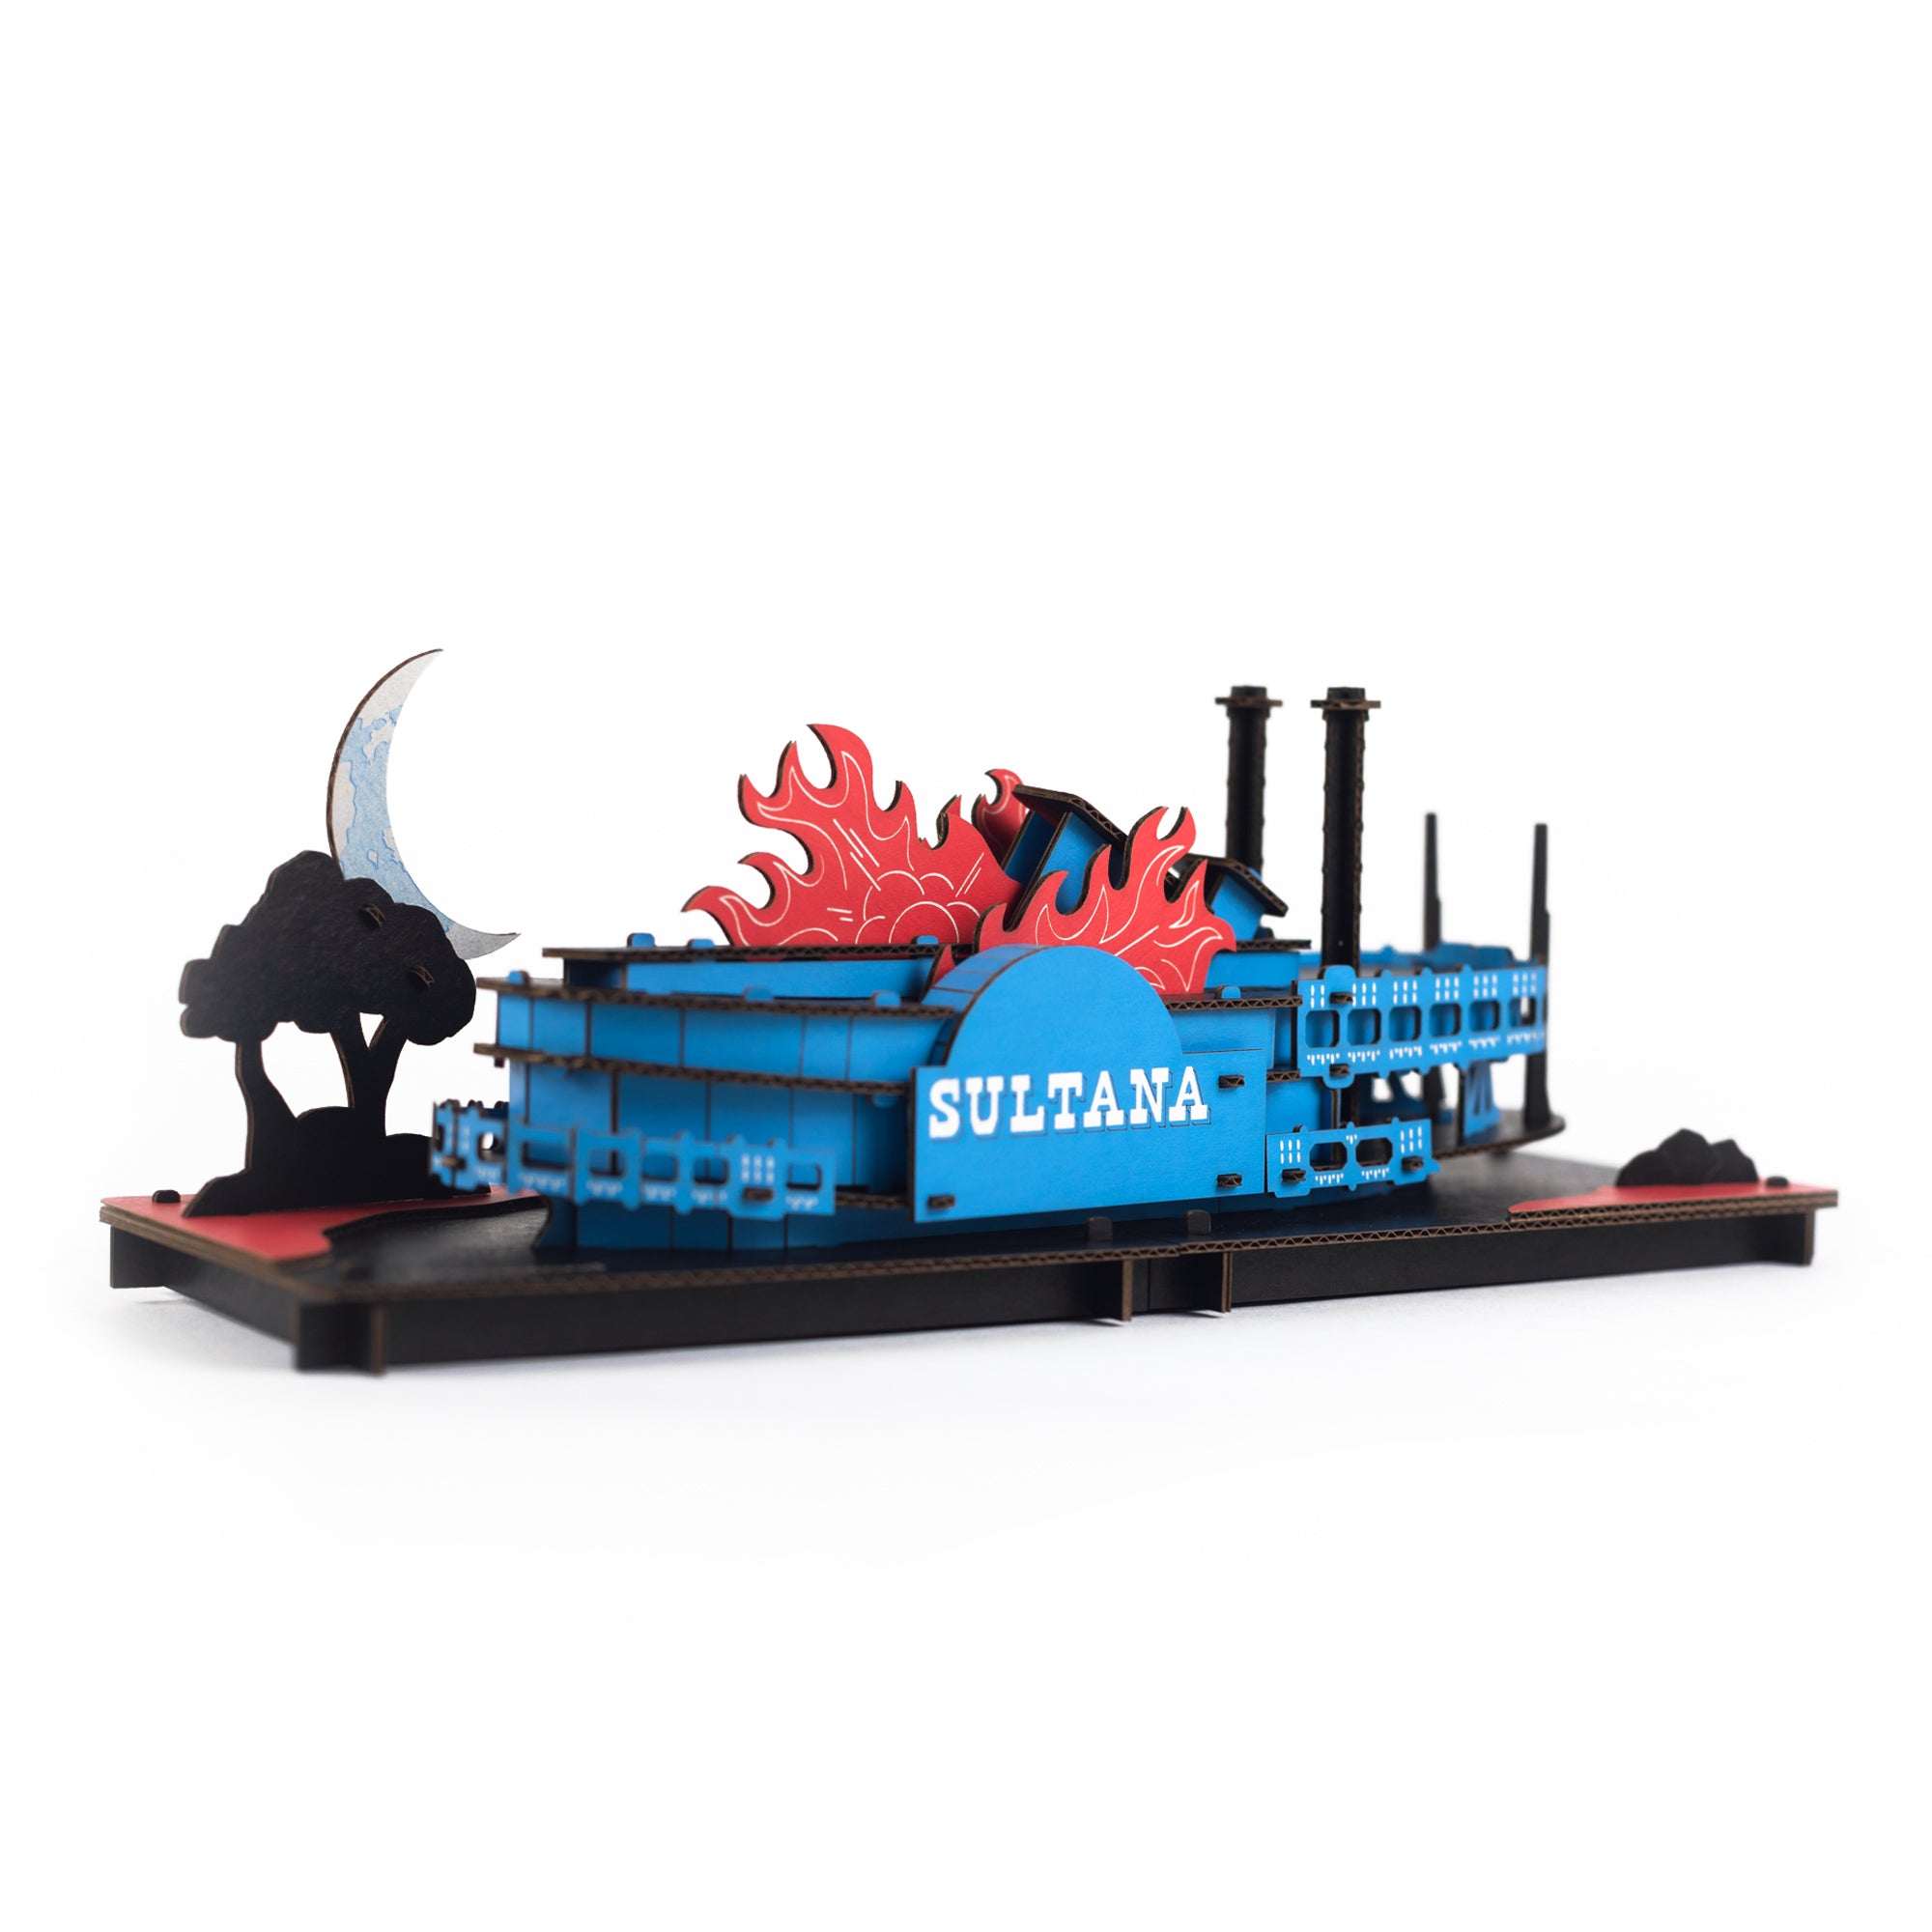 Sultana Steamboat Disaster Model Kit shown assembled with flame explosion showing